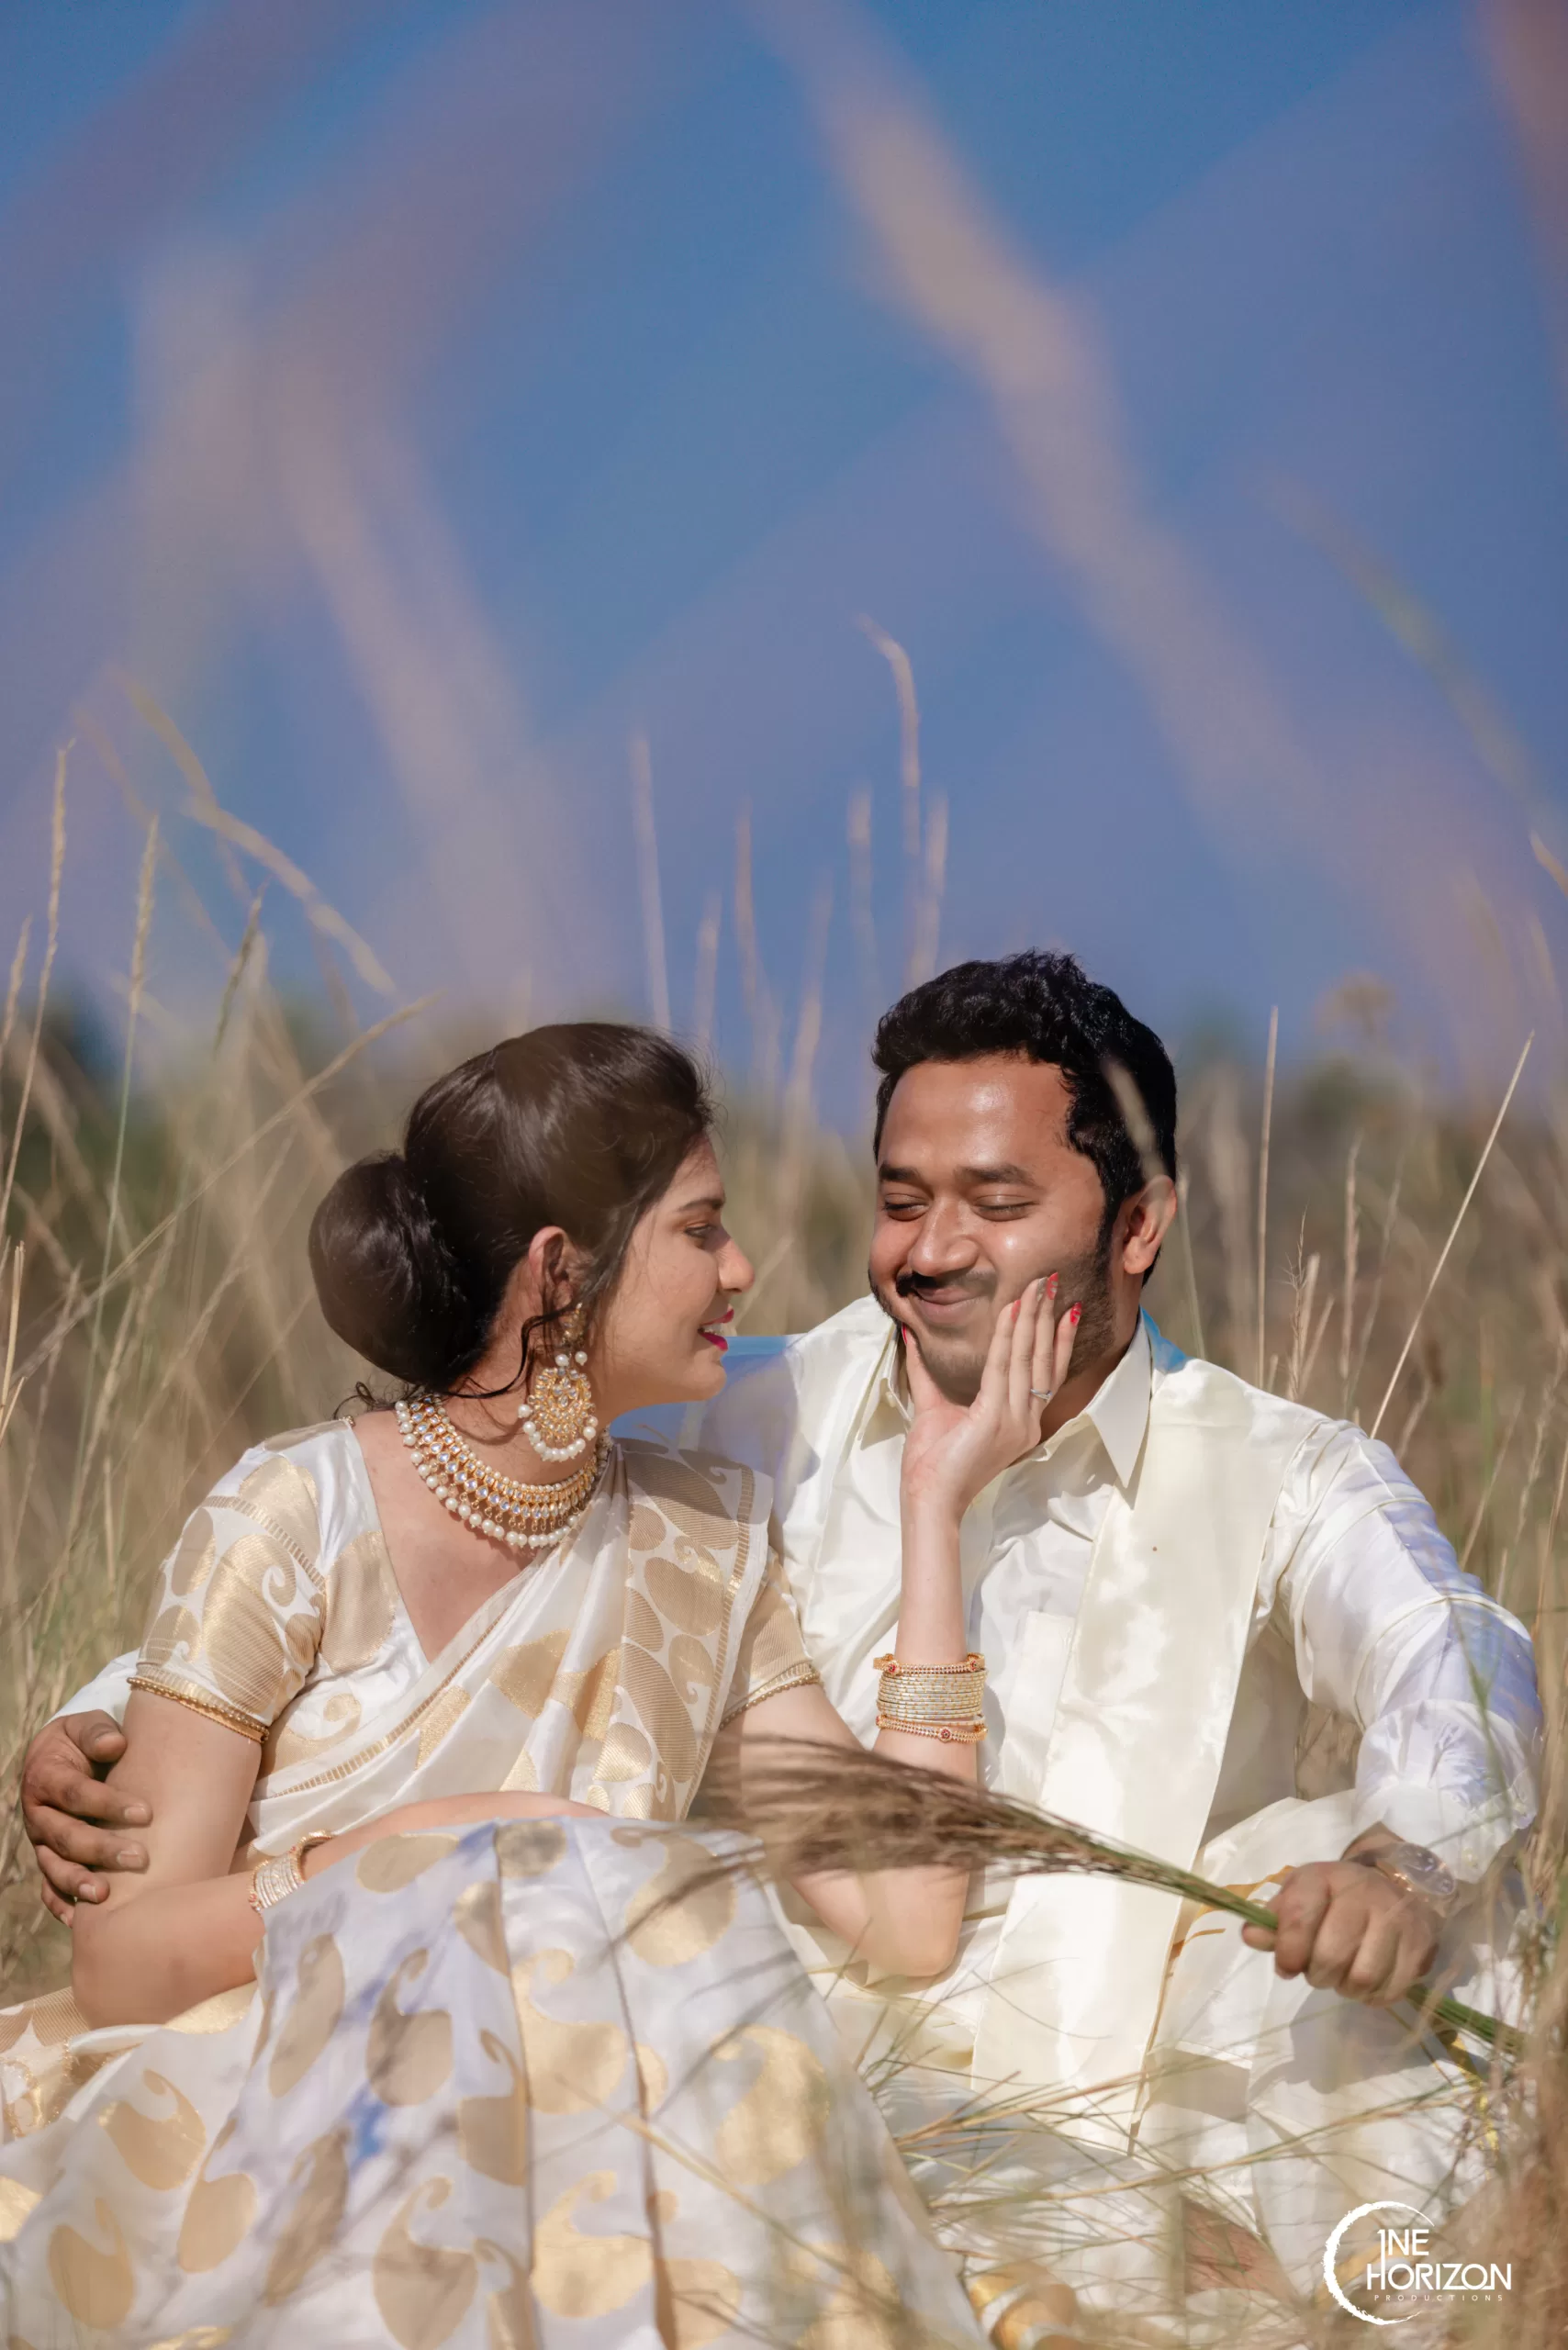 10 Creative Picture Poses For The Stylish Wedding Couple